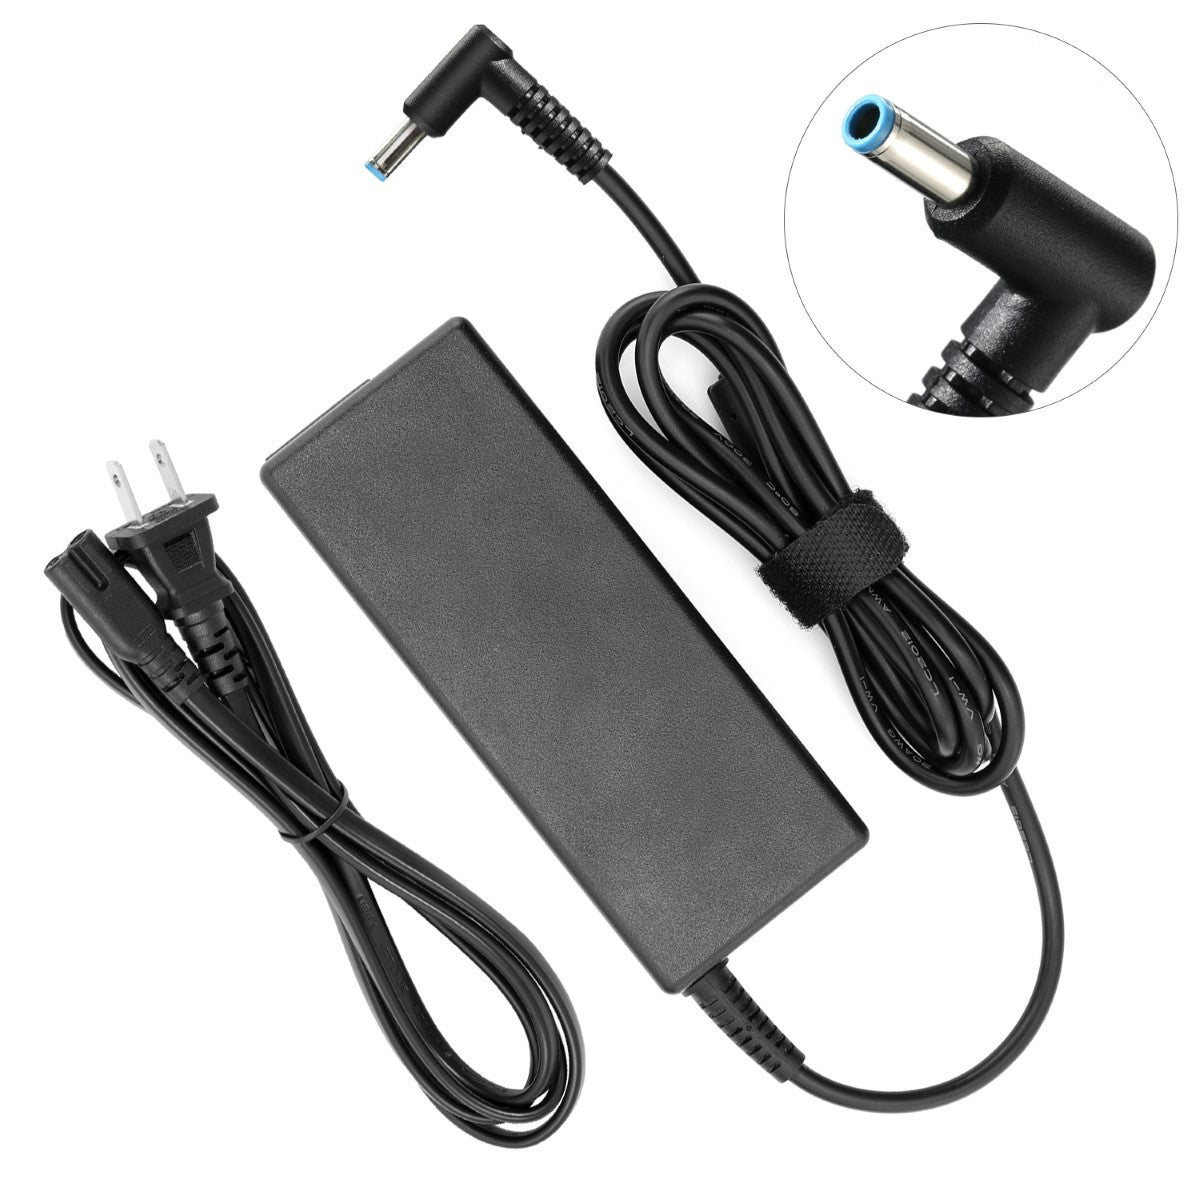 AC Adapter Charger for HP ProBook 440 G3 Notebook.